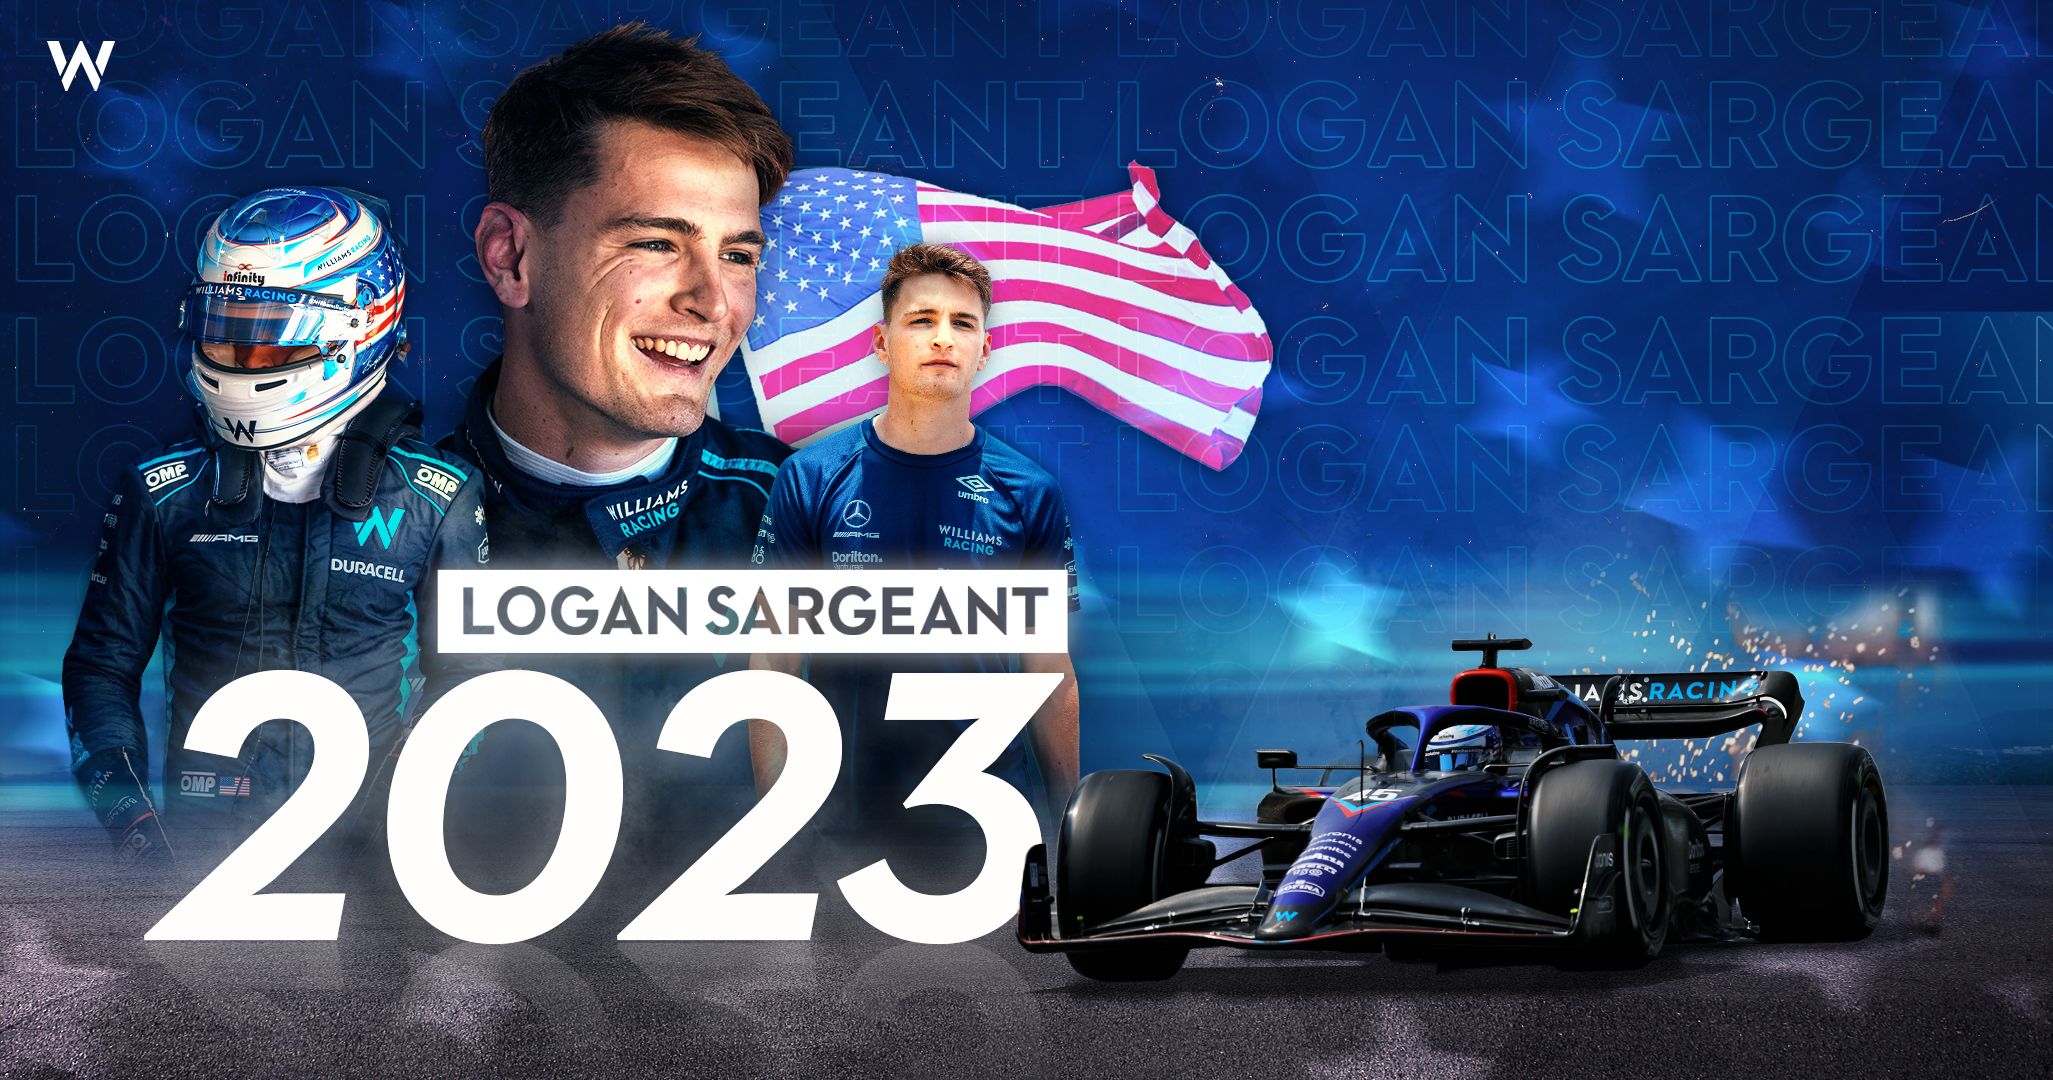 Logan Sargeant to drive for Williams Racing in 2023 Williams Racing